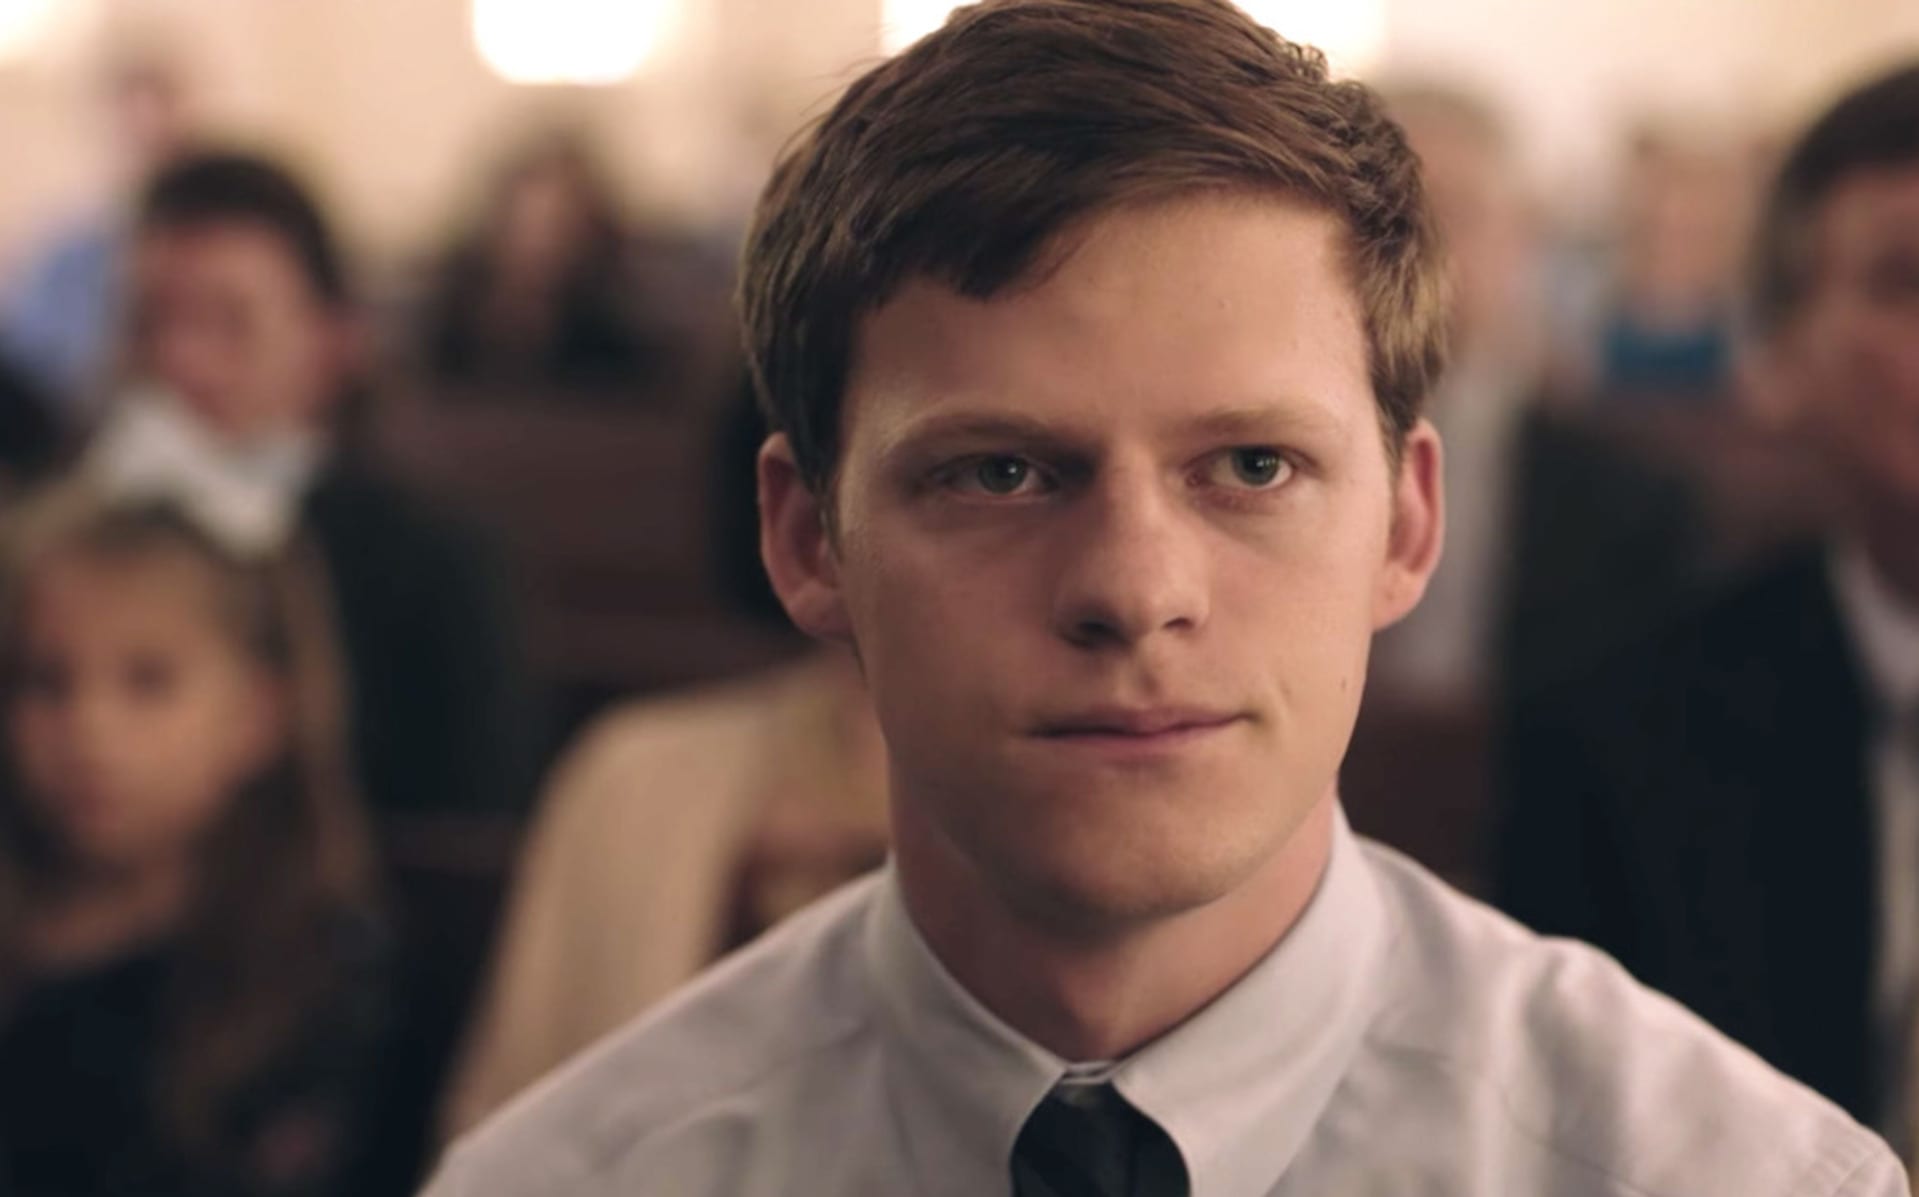 The son of a Baptist preacher is forced to participate in a gay conversion program after being forcibly outed to his parents in 'Boy Erased'.